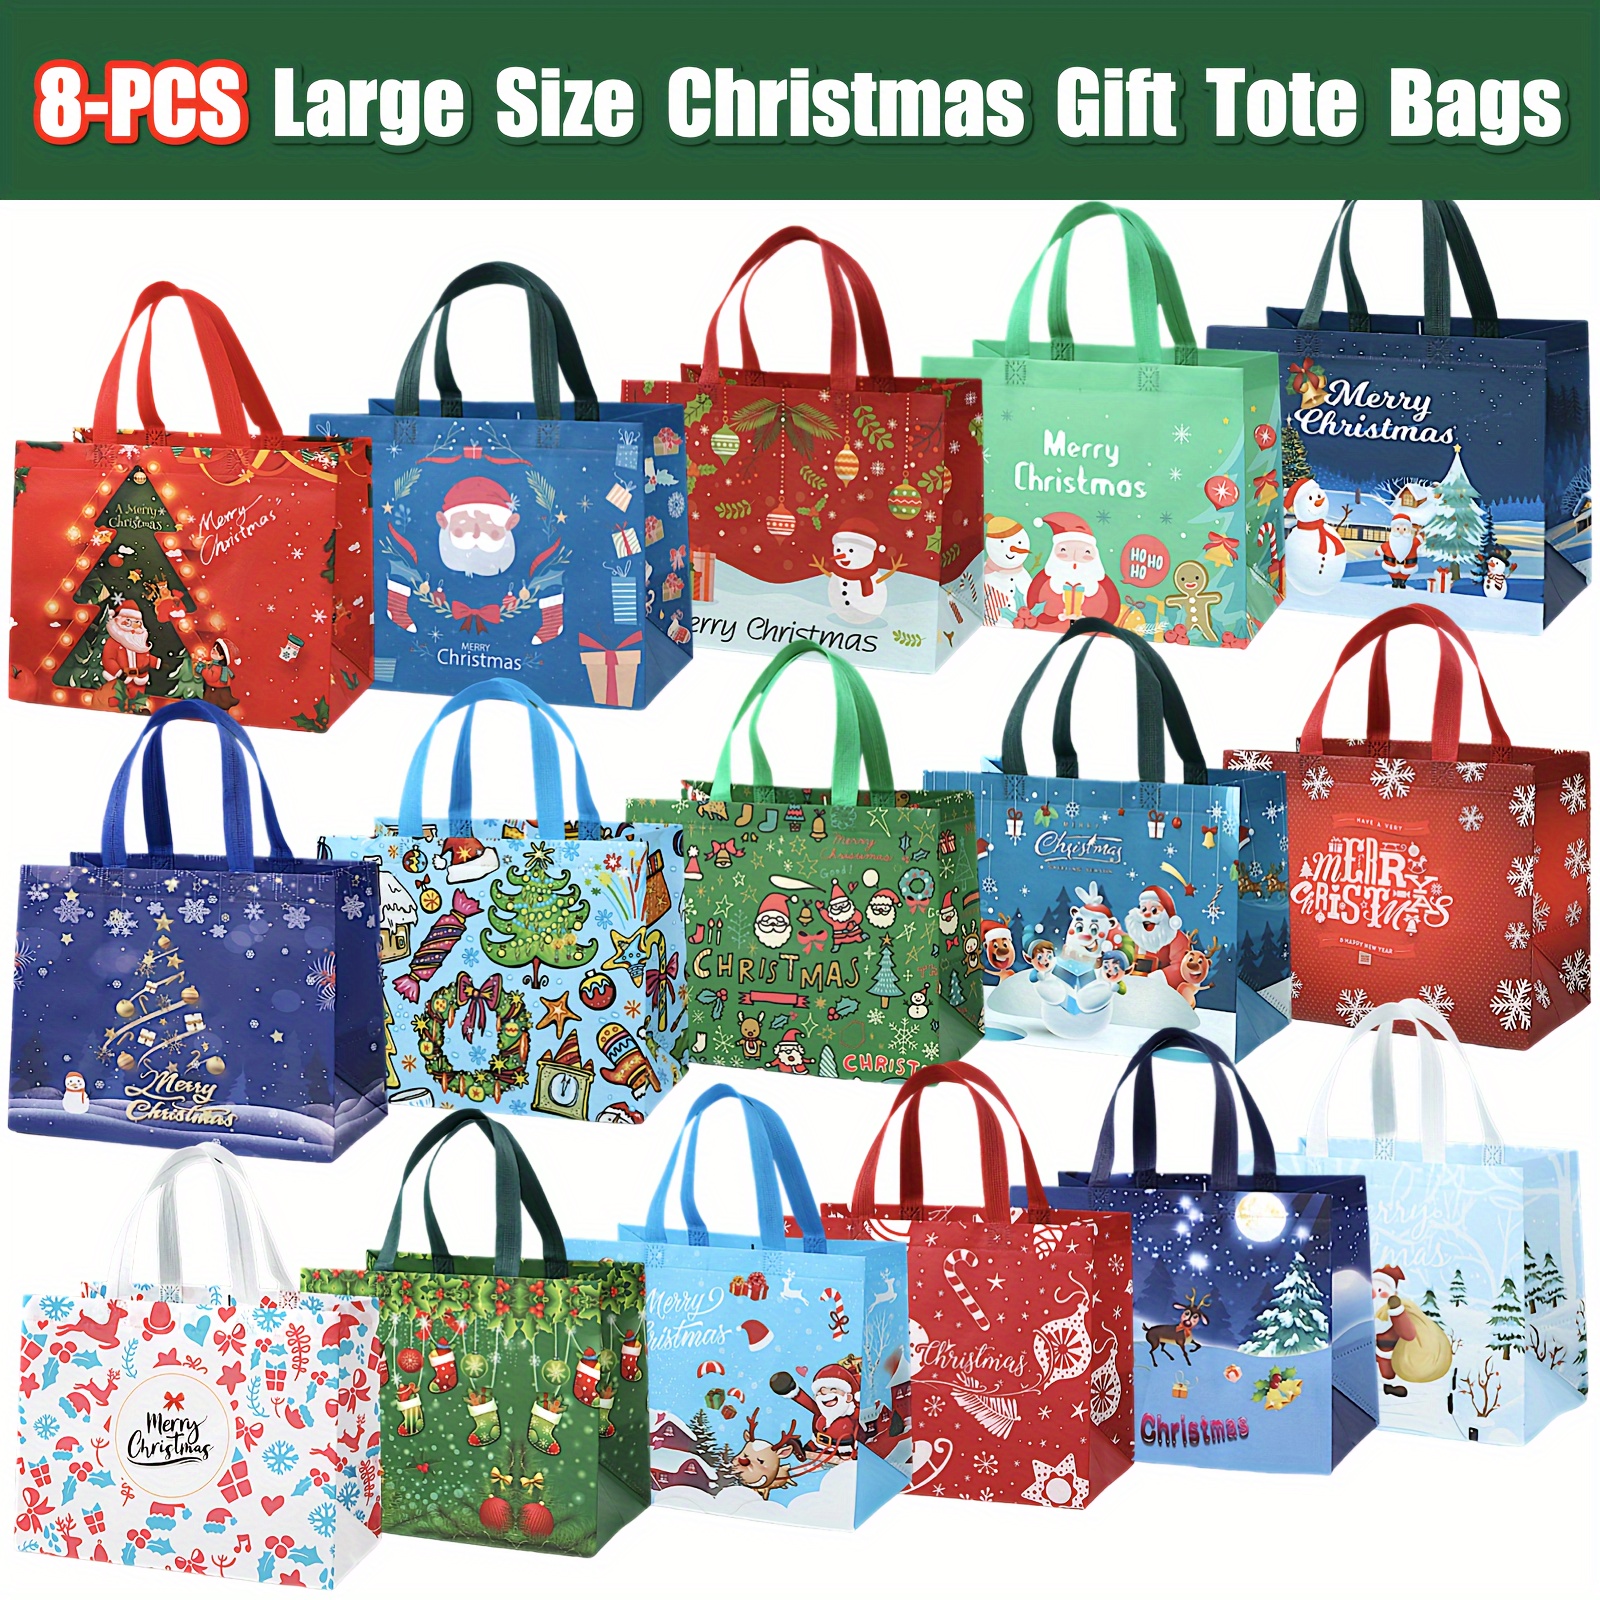  Diamond Painting Kits for Adults Tote Bag with Handles, Diamond  Art Bags, Shopping Bags Merchandise Bags Christmas Gifts for Women